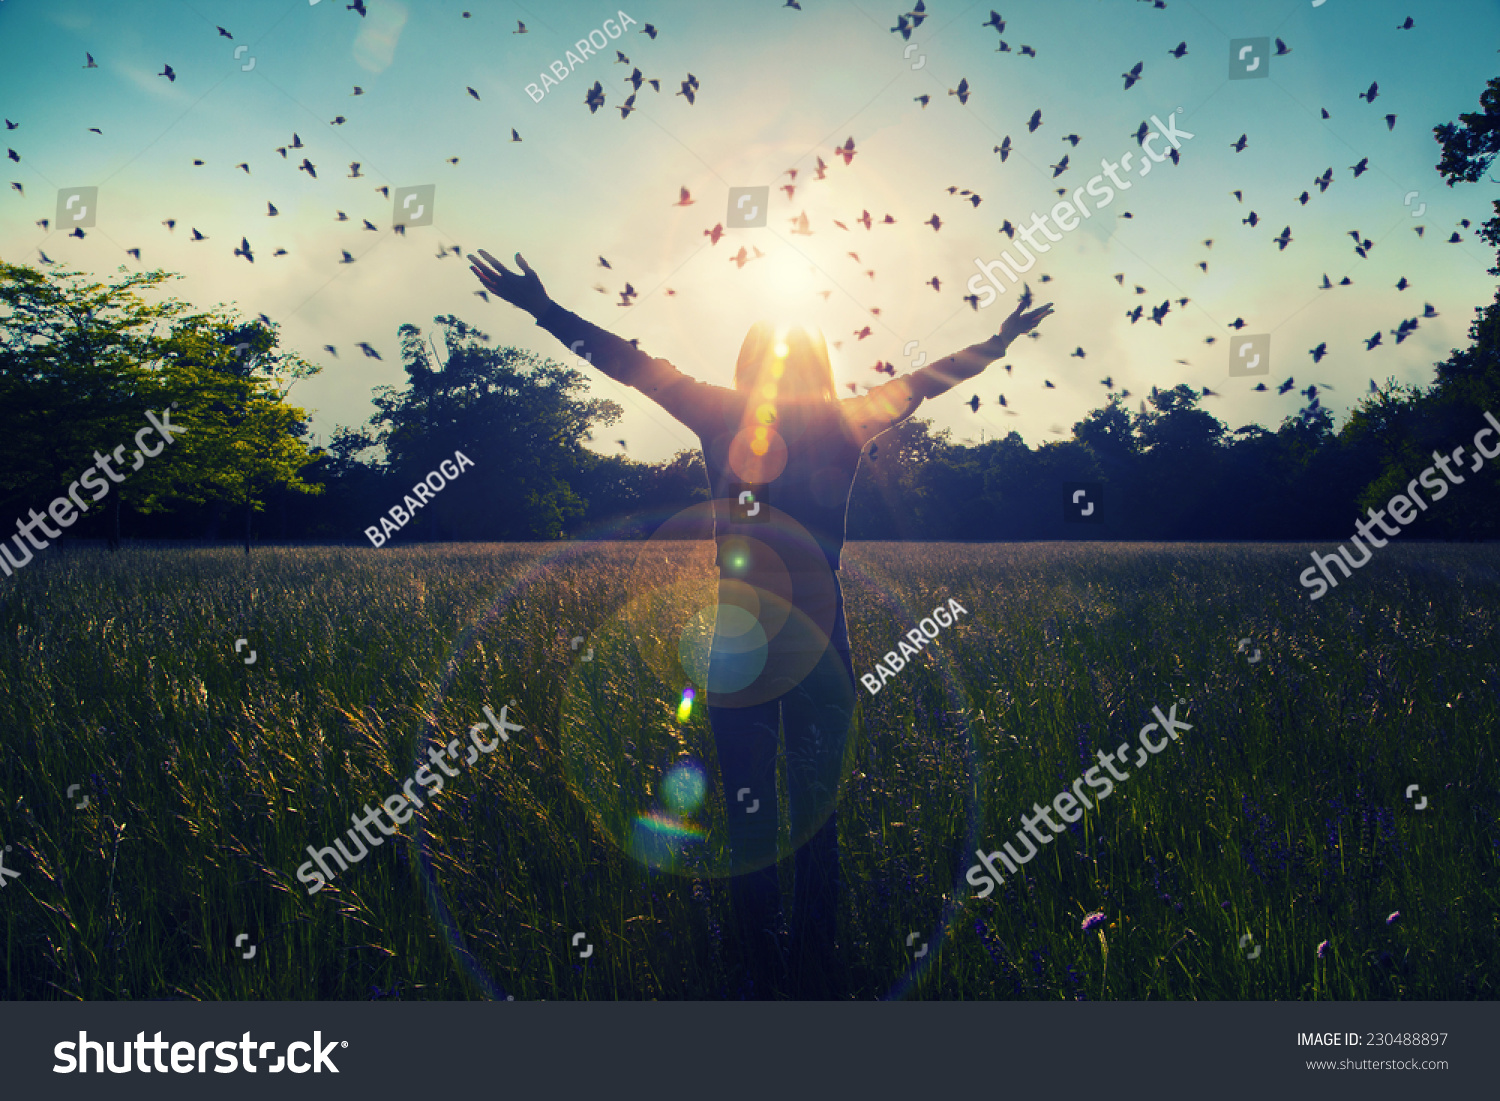 Young girl spreading hands with joy and inspiration facing the sun,sun greeting,freedom concept,bird flying above sign of freedom and liberty  #230488897